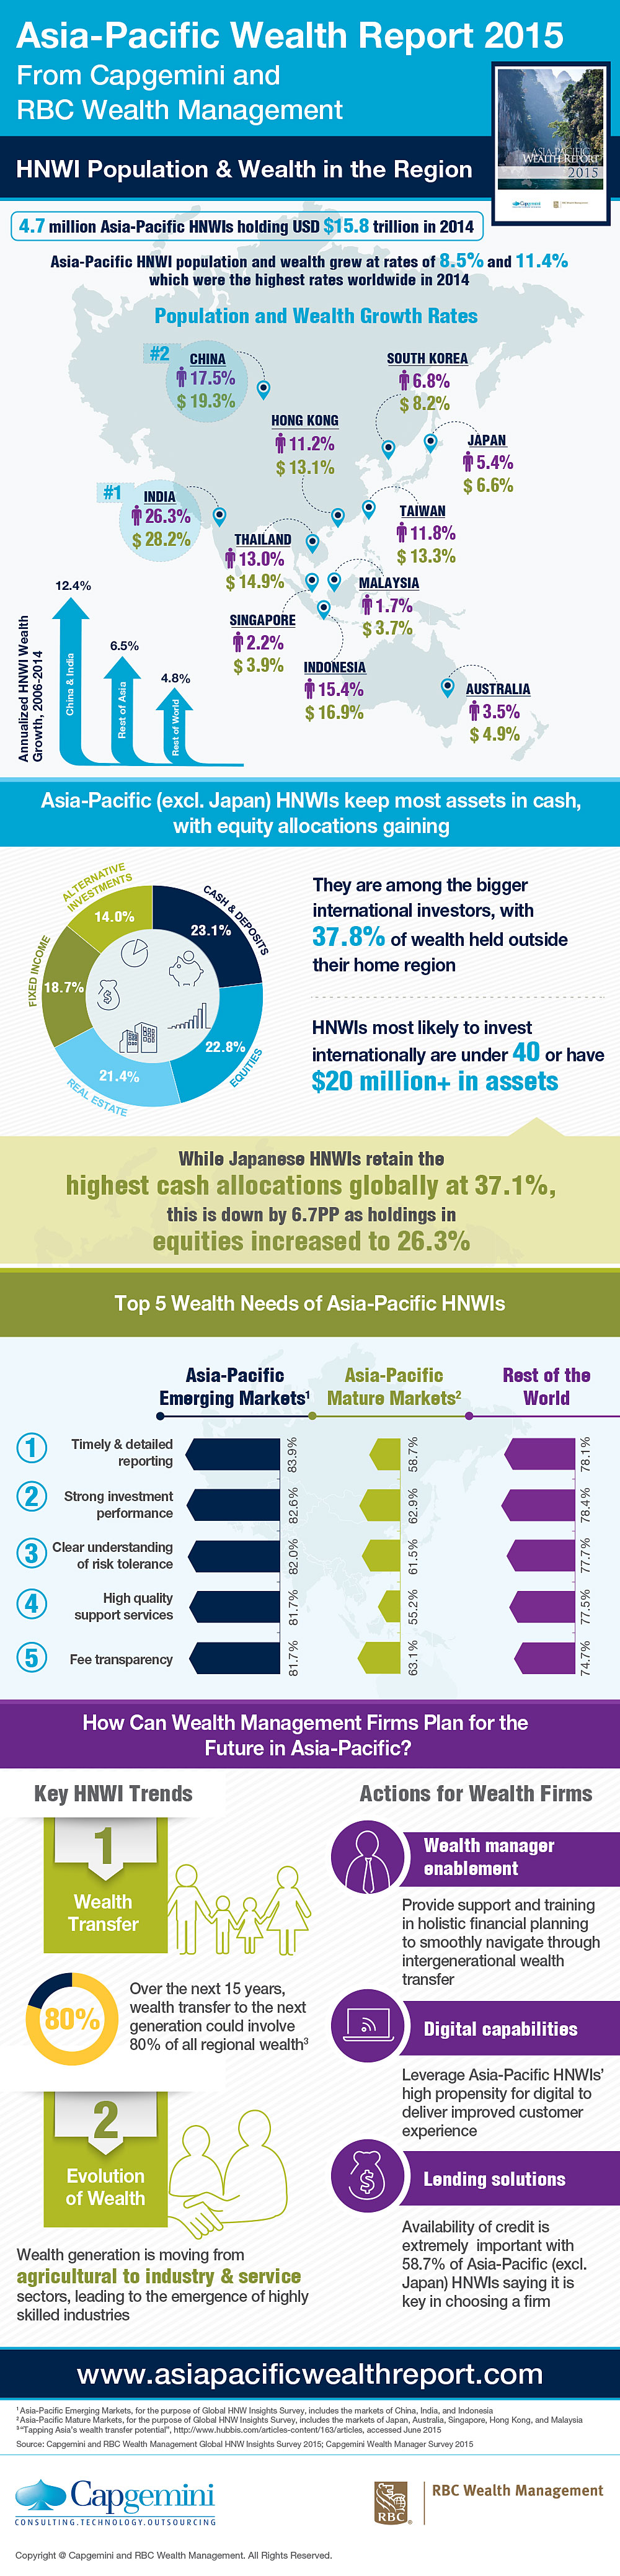 Asia-Pacific Wealth Report 2015 Infographic